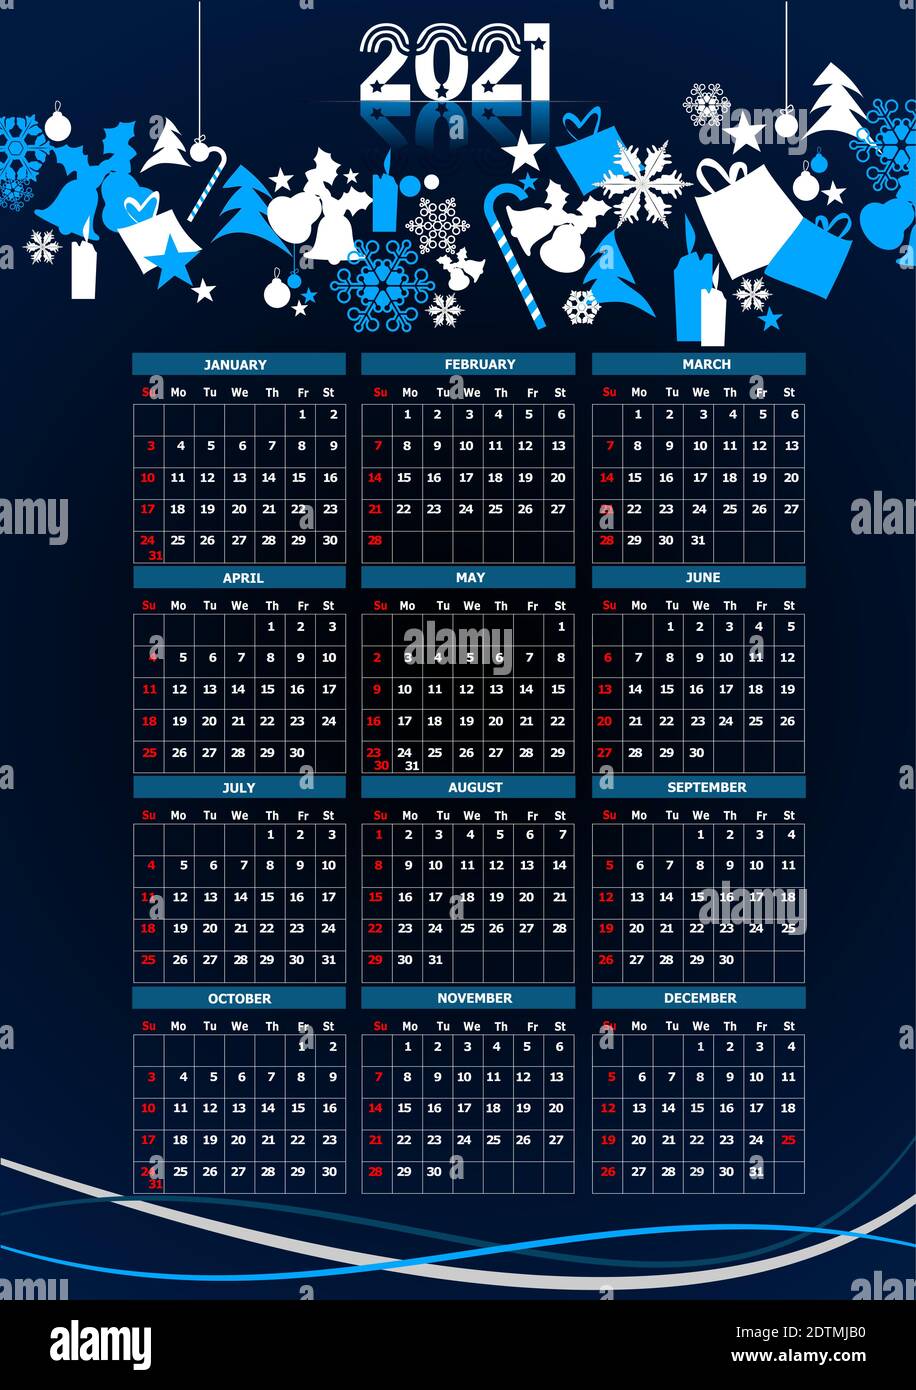 2021 calendar with Christmas images. Vector illustration Stock Vector